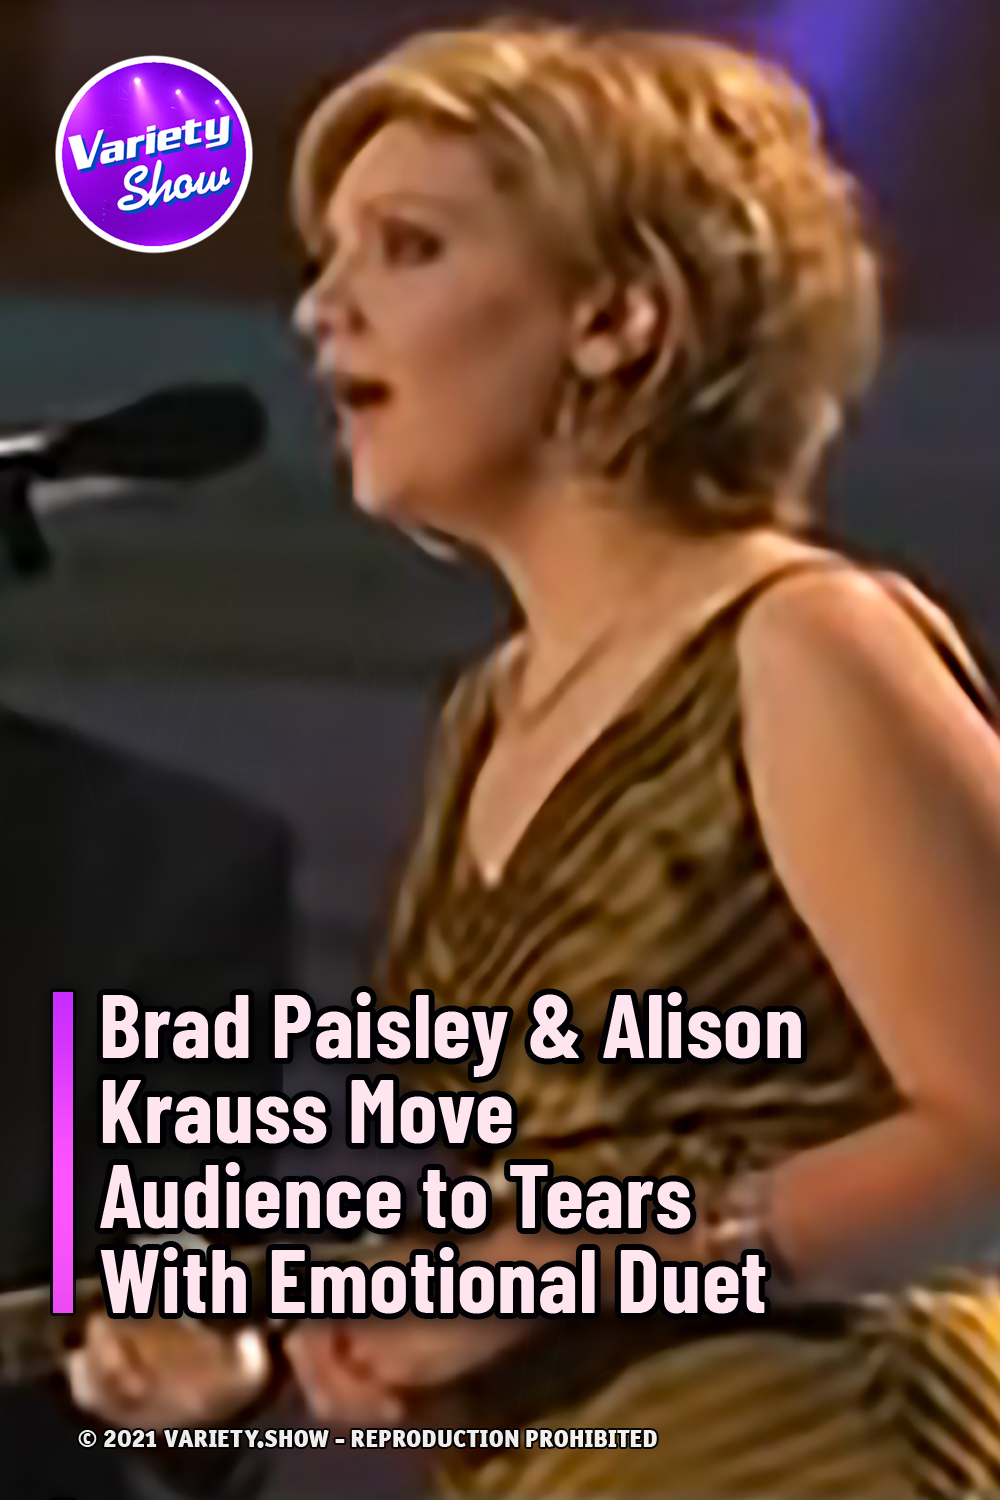 Brad Paisley & Alison Krauss Move Audience to Tears With Emotional Duet